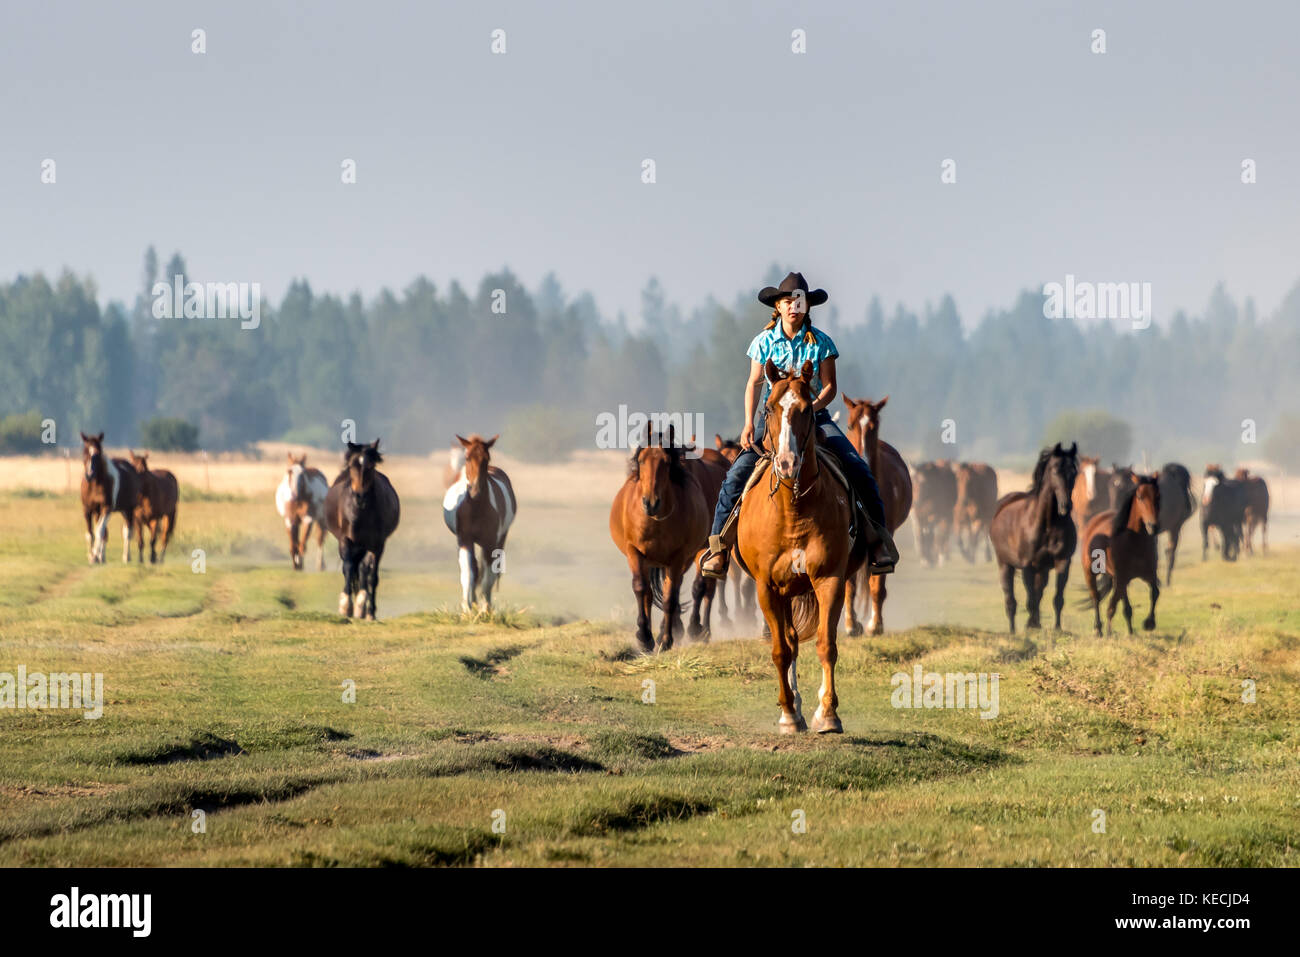 A cowgirl in a cowboy hat on horseback leads a herd of horses over a grass meadow in the morning light in western USA. Stock Photo